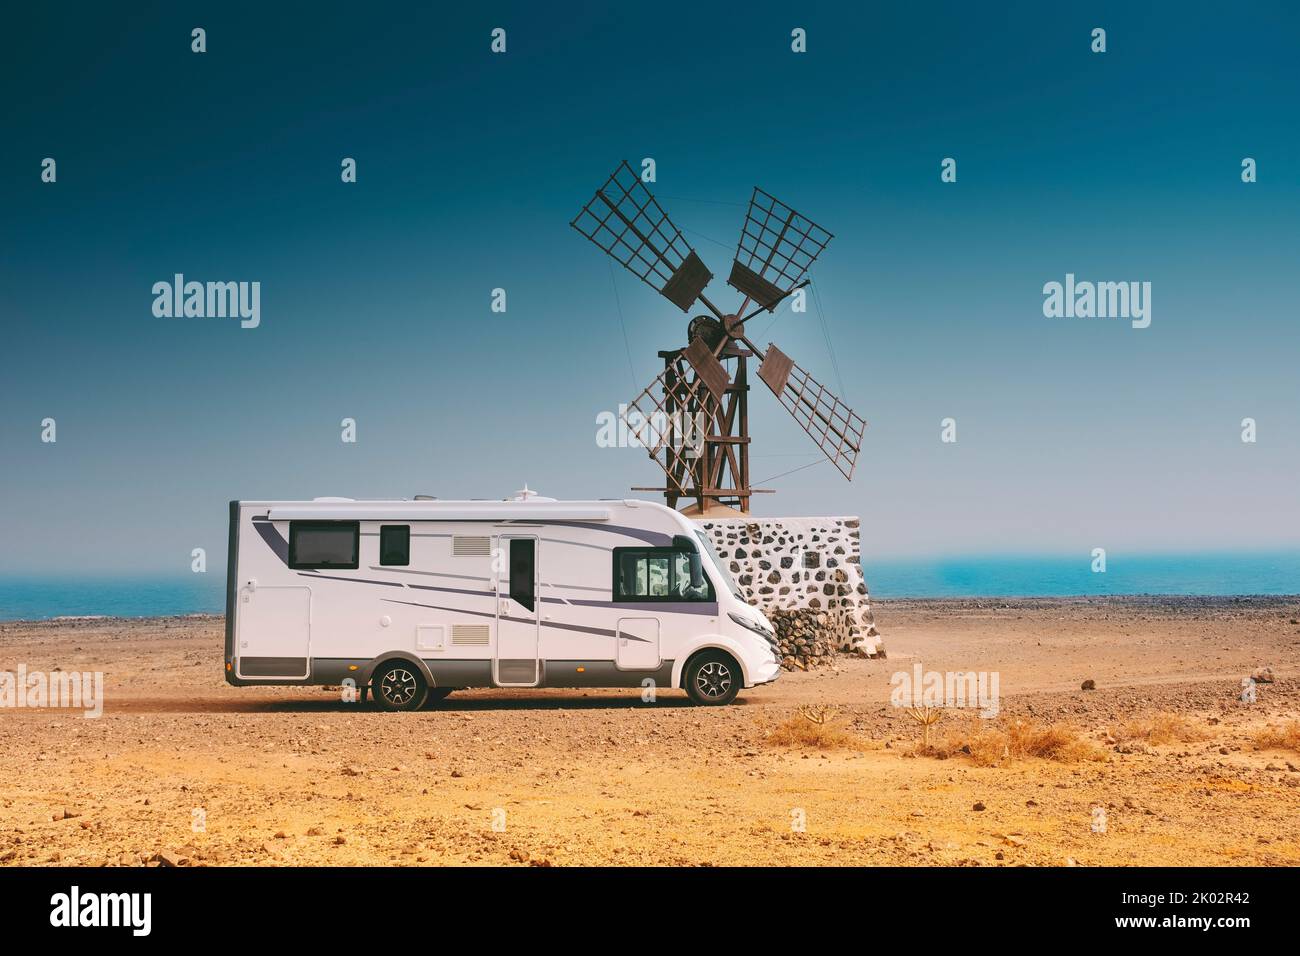 Big modern camper van motorhome parked near an old windmille in the desert. Concept of wild and free campsite and off grid life. Travel people and alternative home on wheels Stock Photo